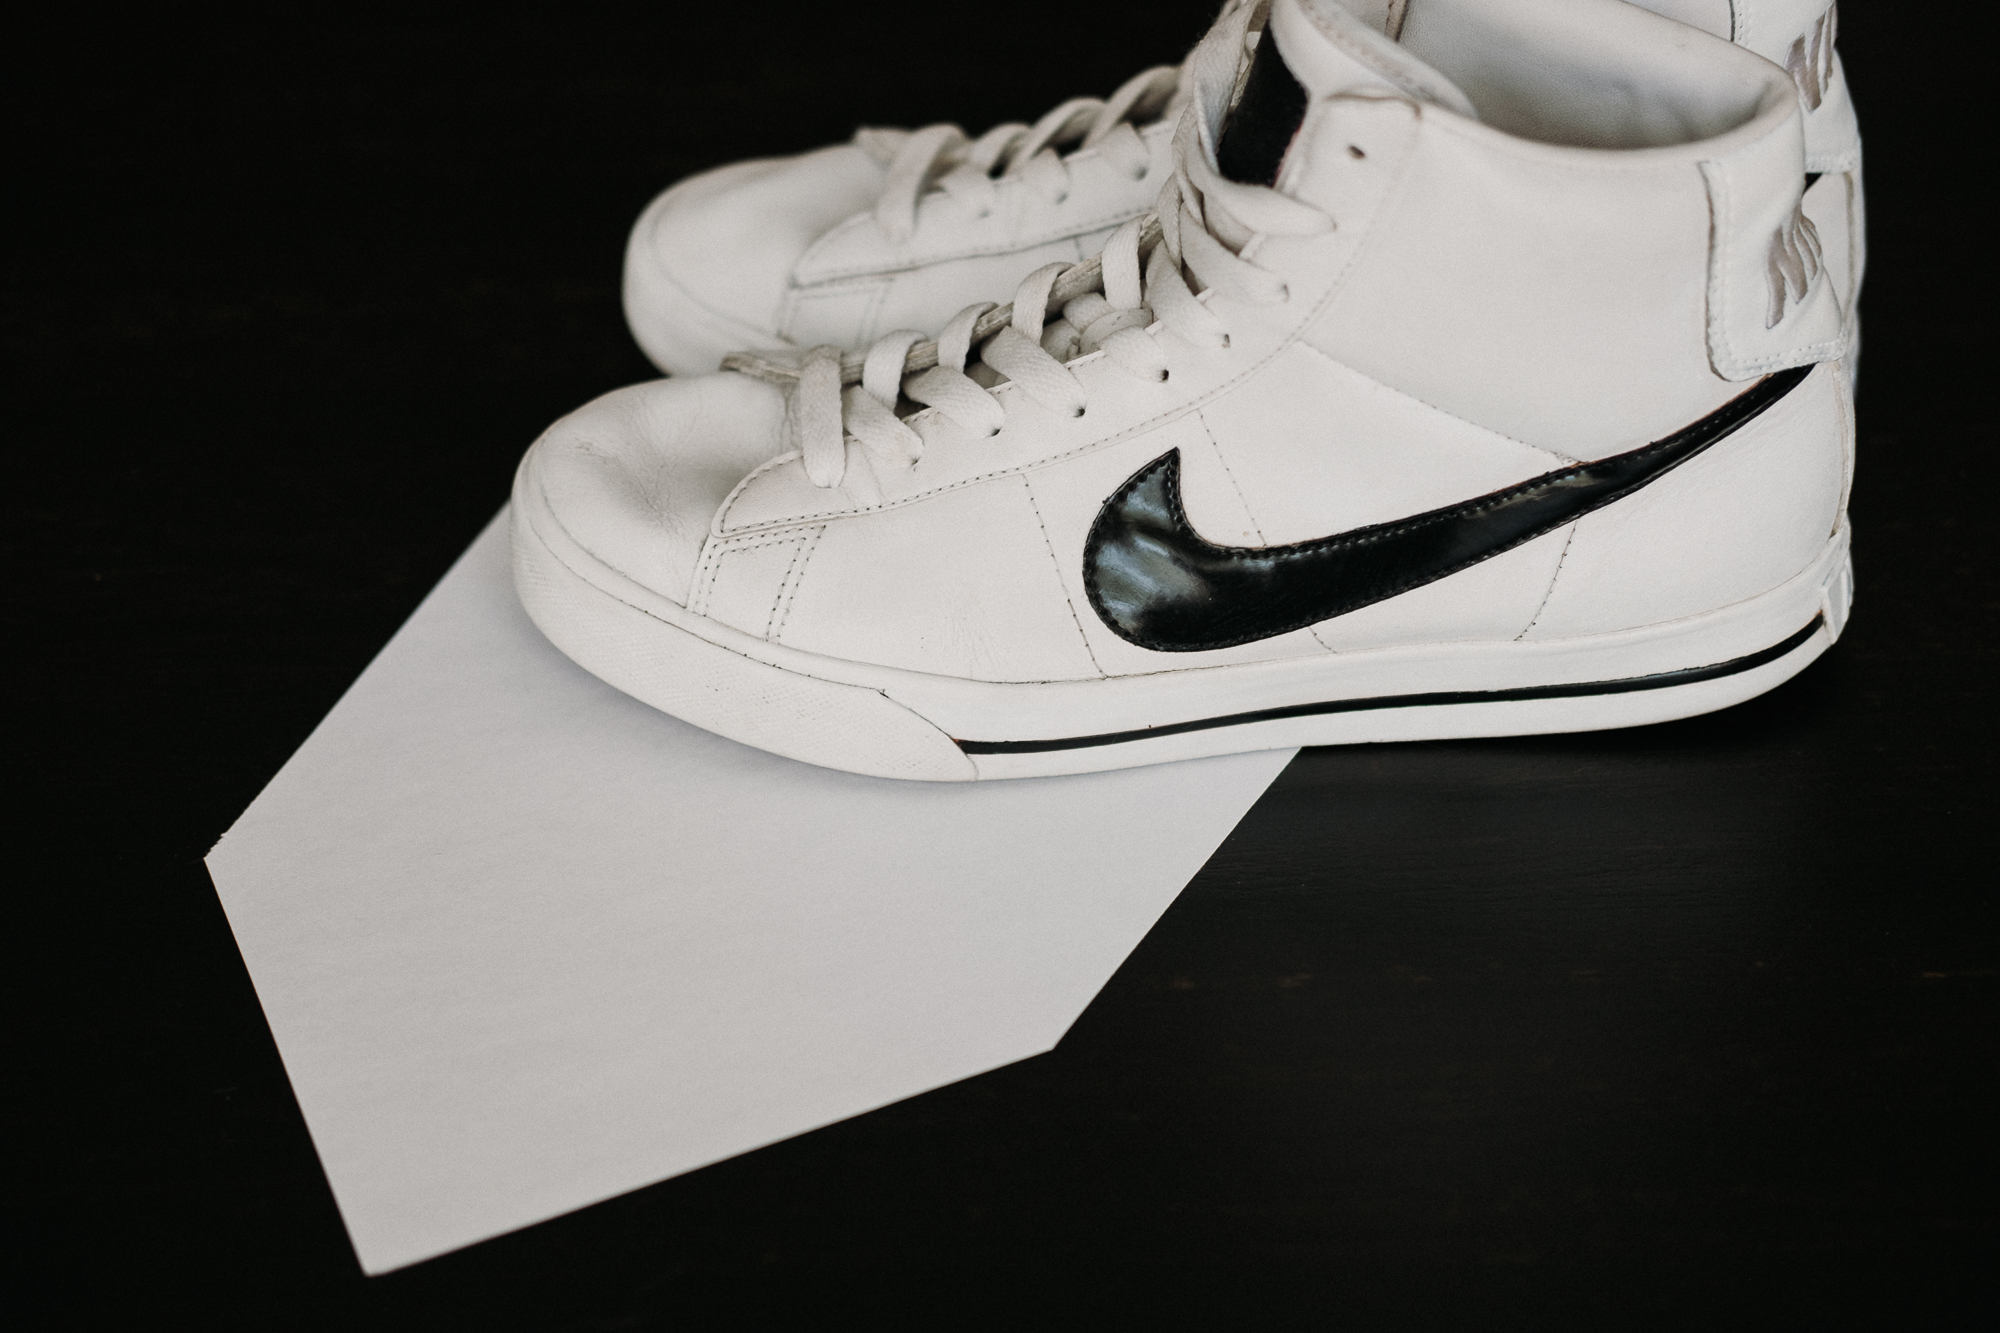 painting nike swoosh on shoes